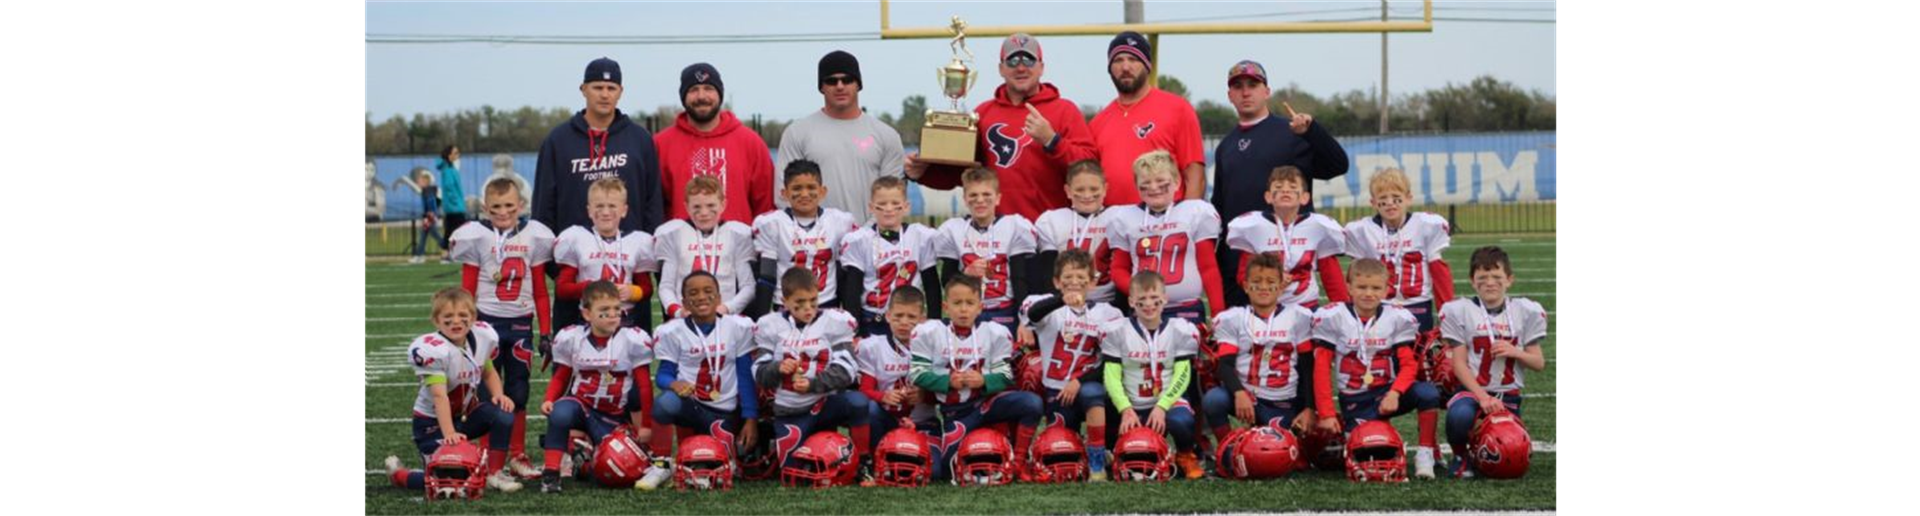 2018 PeeWee Super Bowl Champs